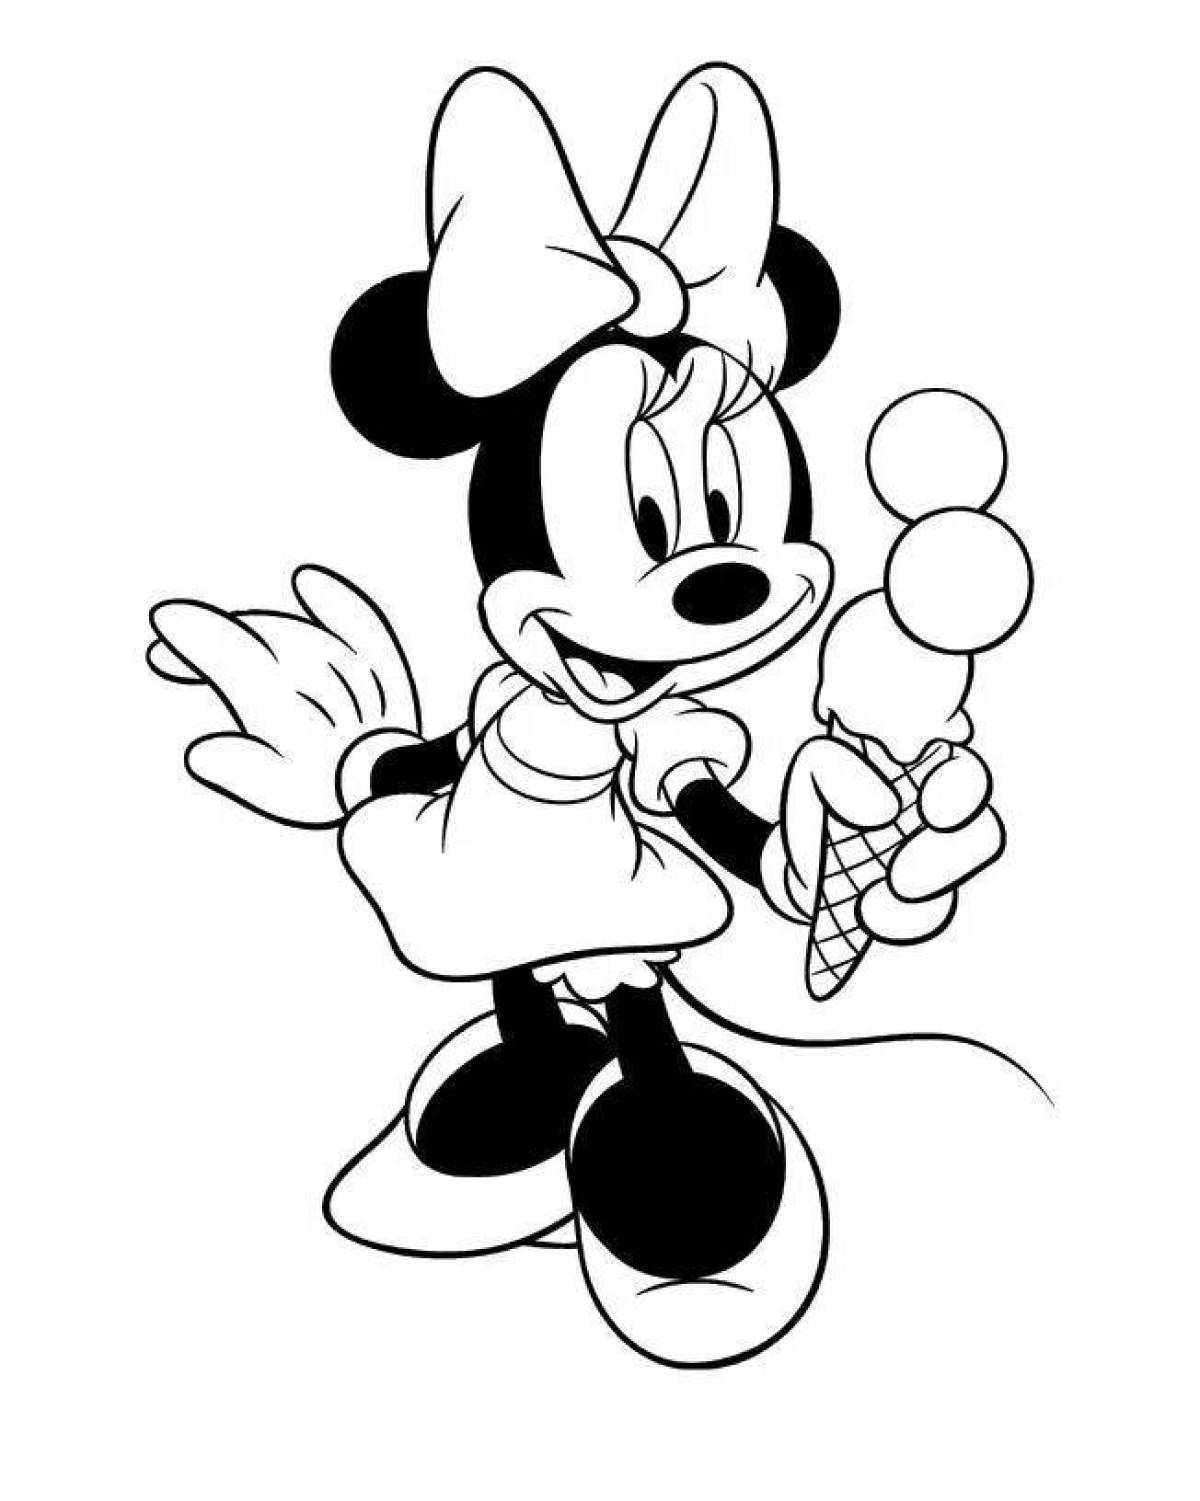 Coloring shining minnie mouse